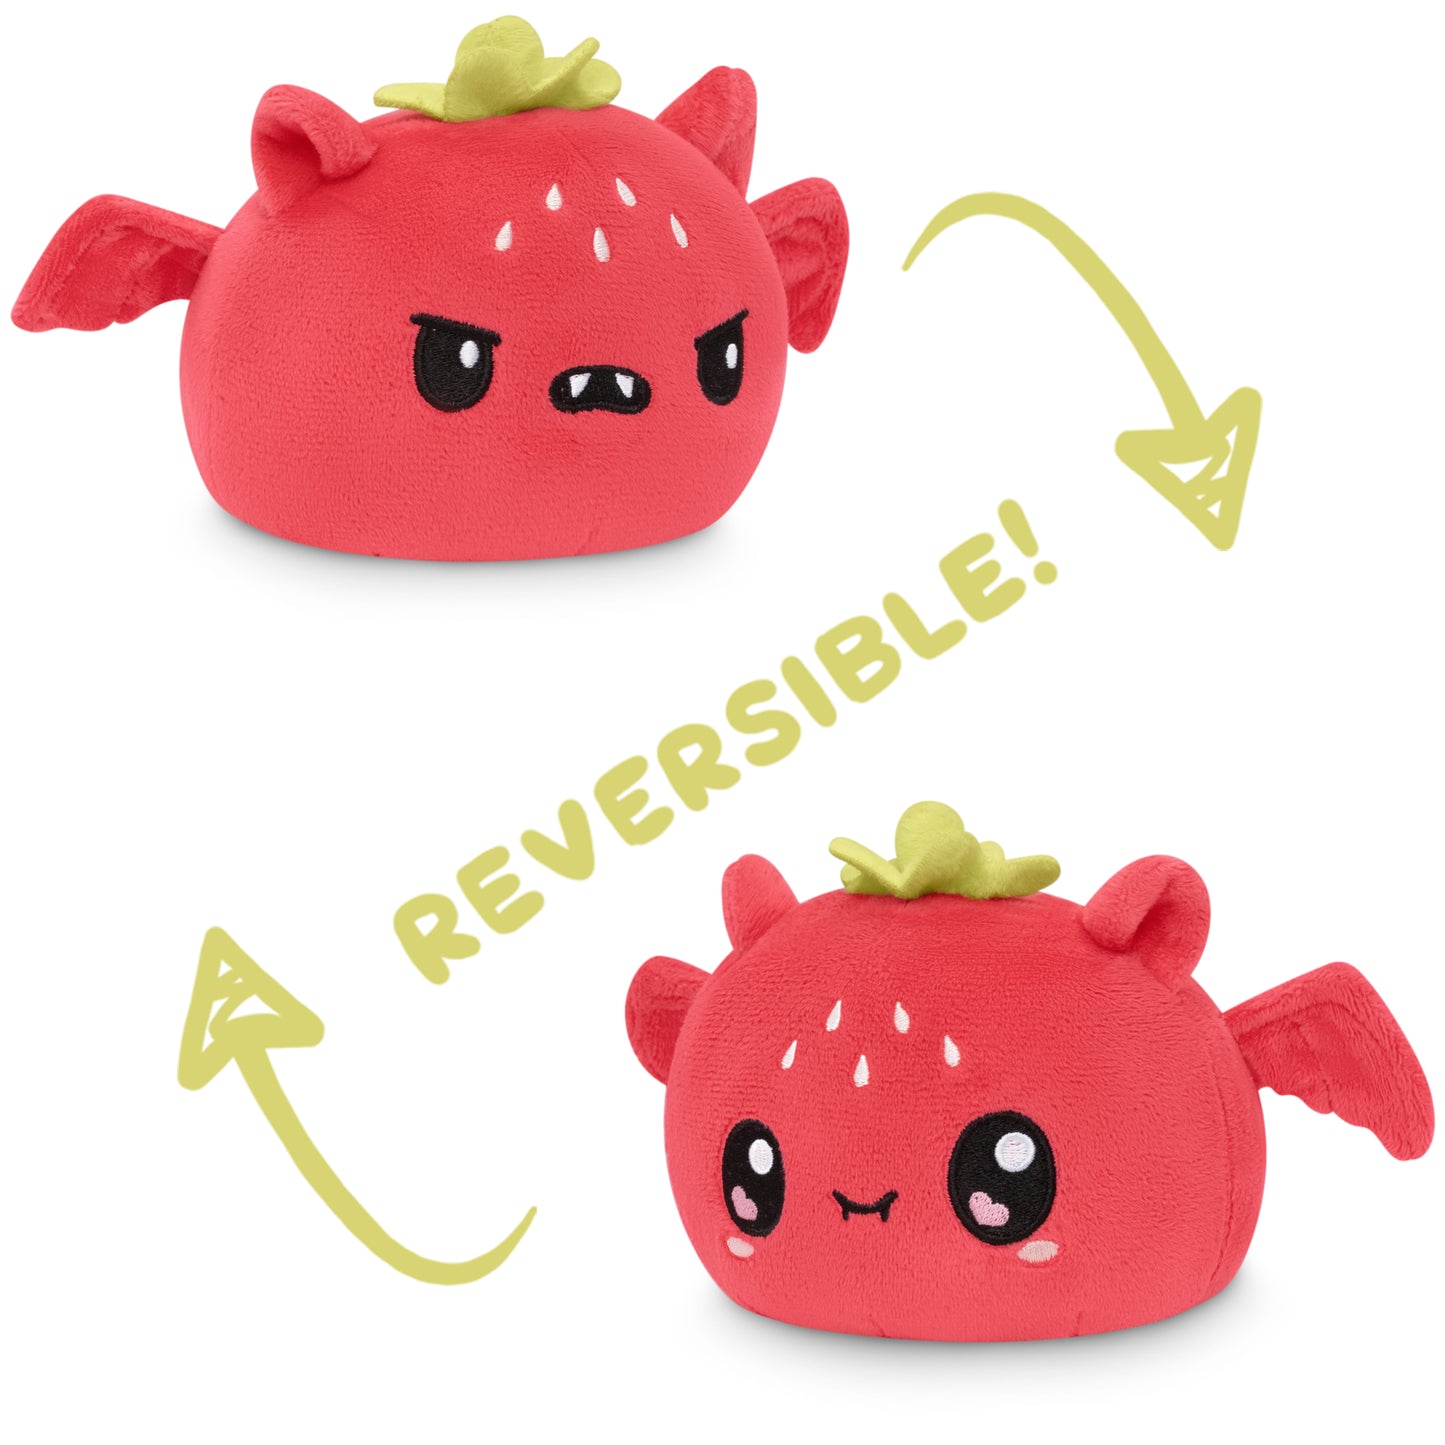 These TeeTurtle Strawberry Reversible Bat Plushies are adorable, featuring words on them.